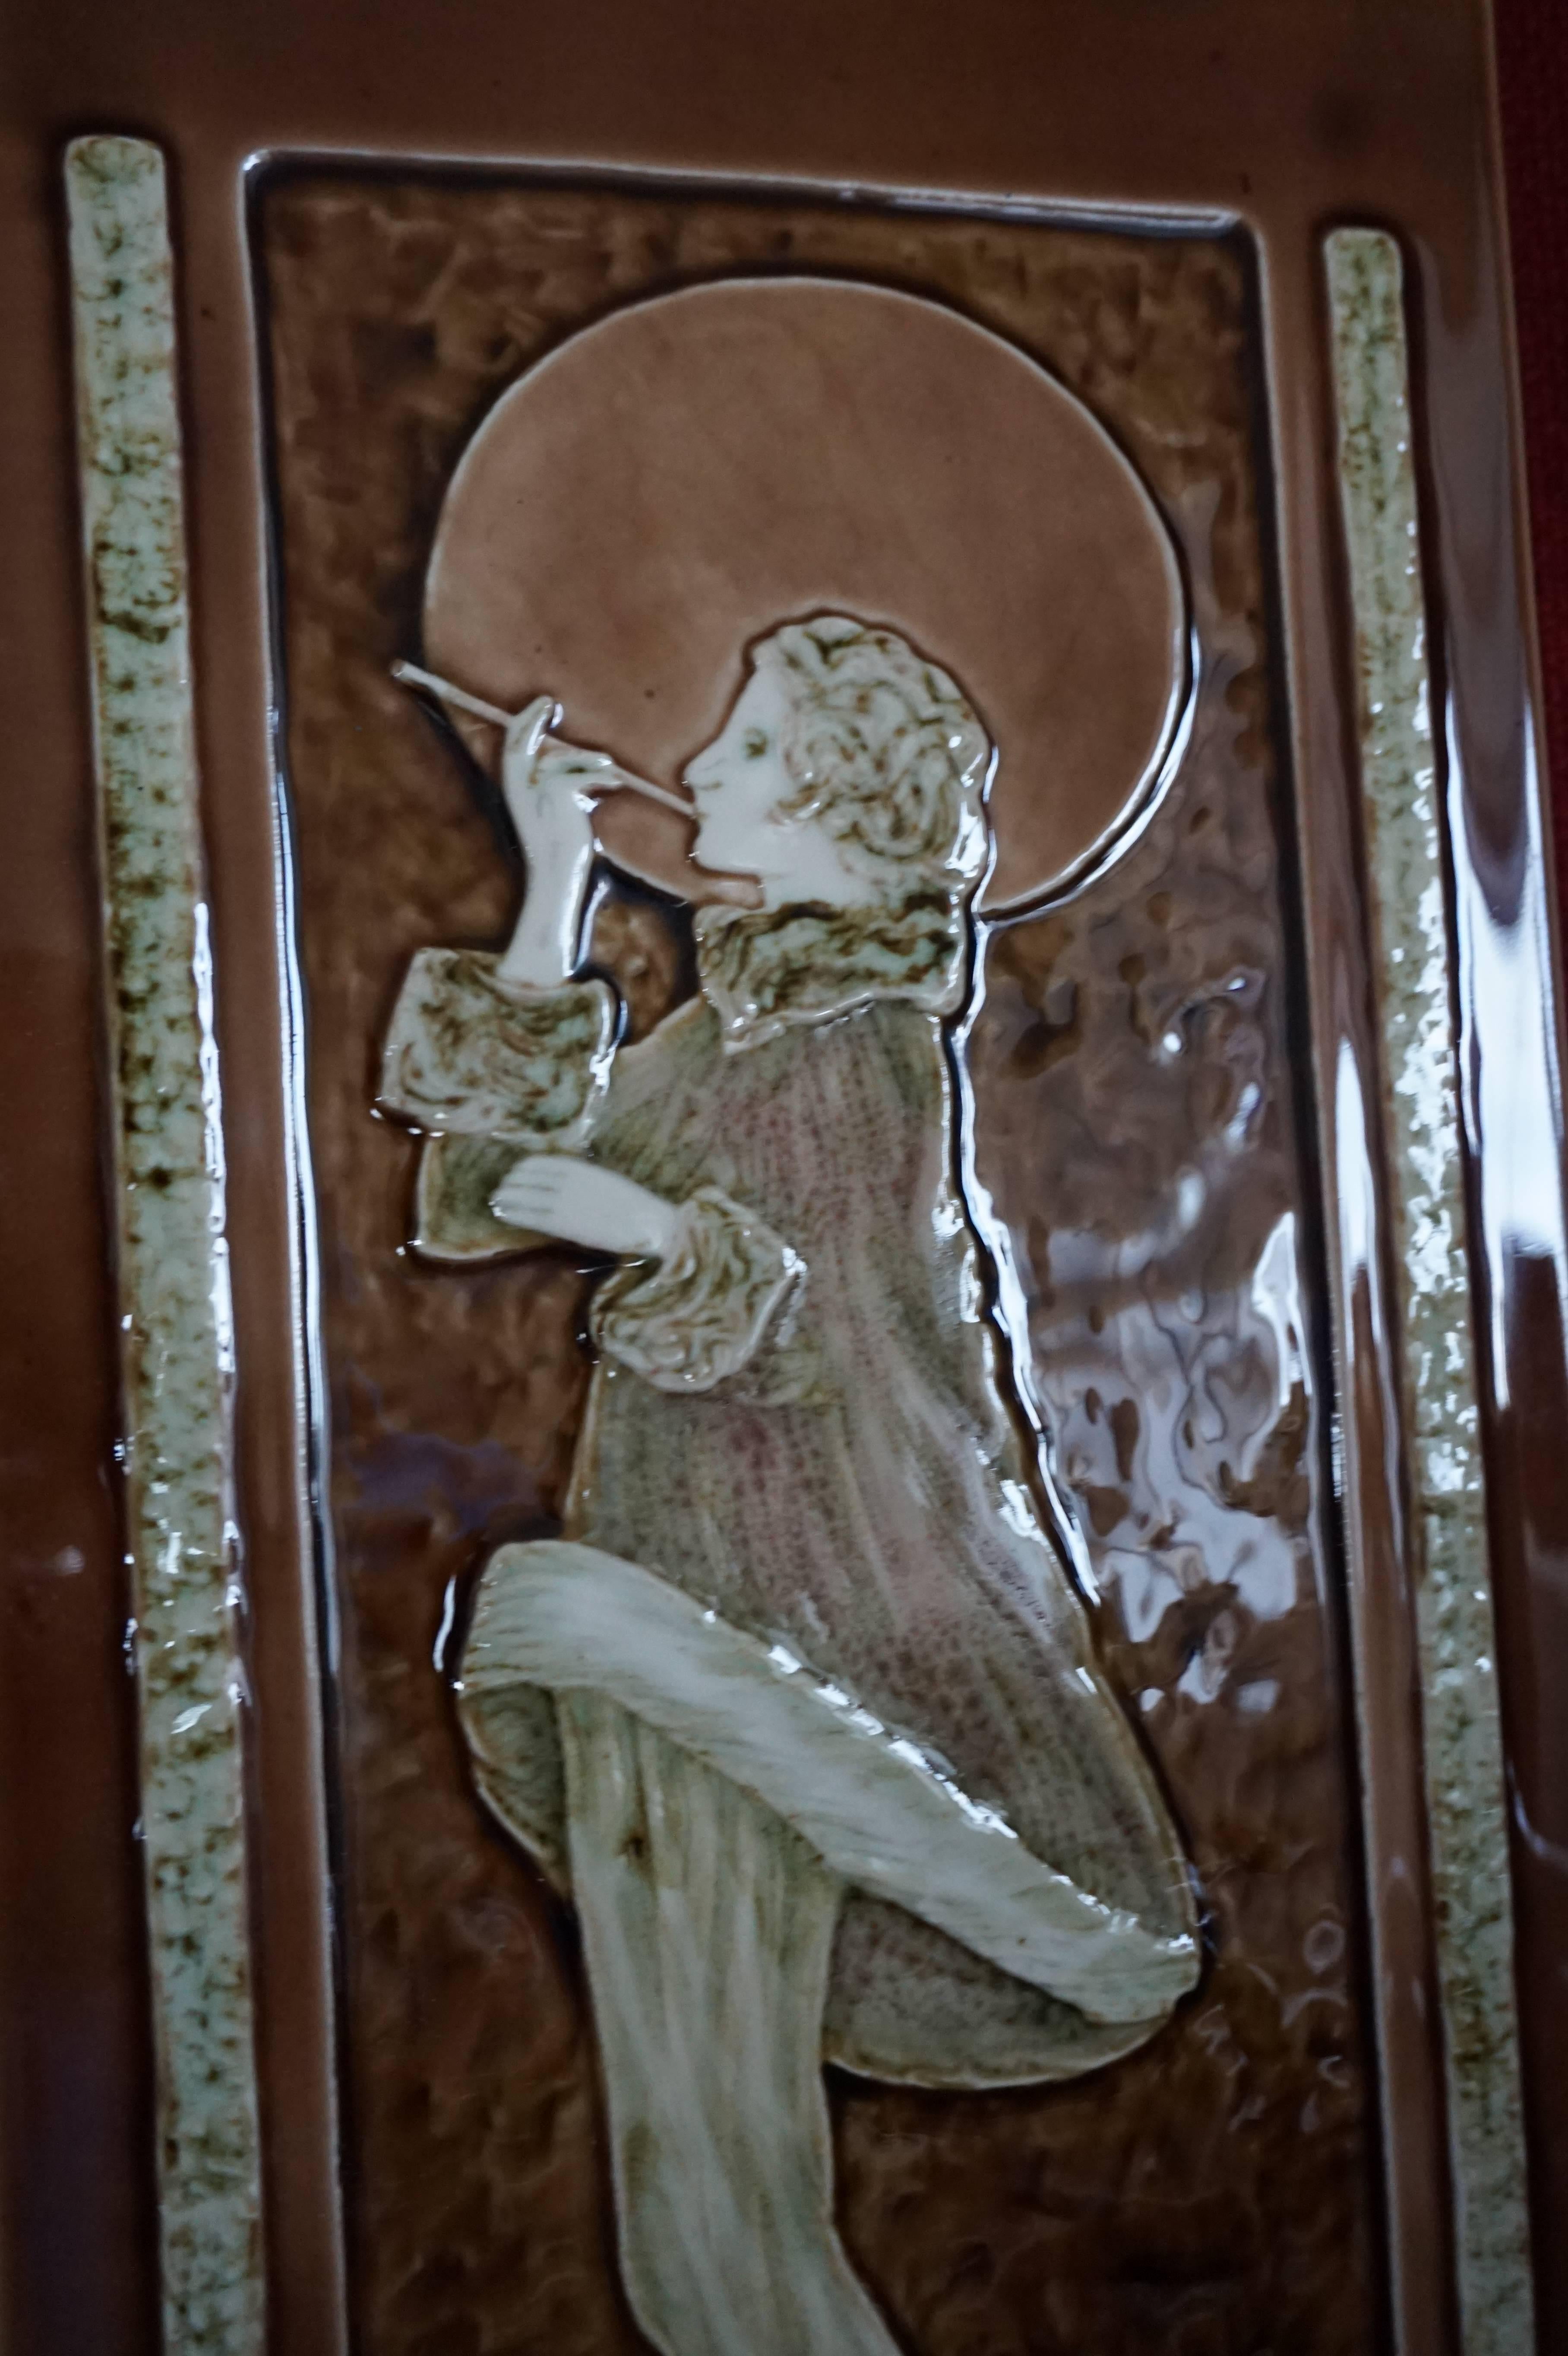 Rare and large tile with a stylish image of a beautifully dressed Art Deco lady.

This stunning tile may not be of the period, but the style is one hundred percent Art Deco and it is perfectly colored and Majolica glazed. This tile is thick and